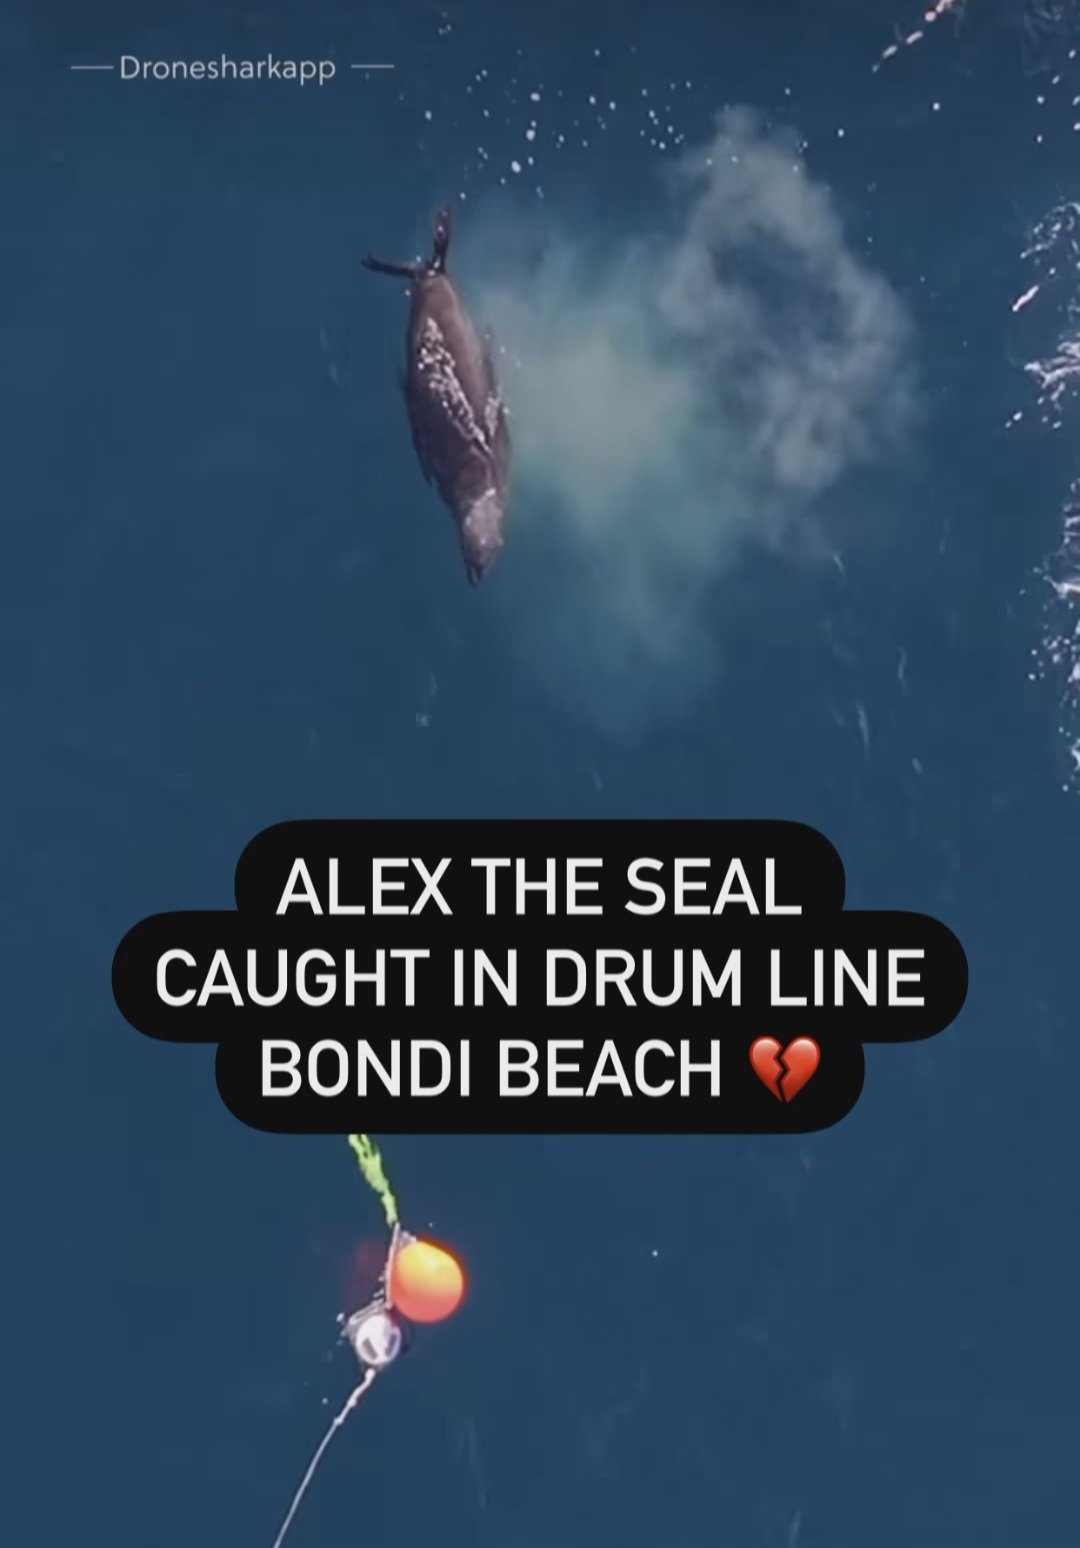 Animal Justice Party on X: Alex the seal is a friendly Bondi